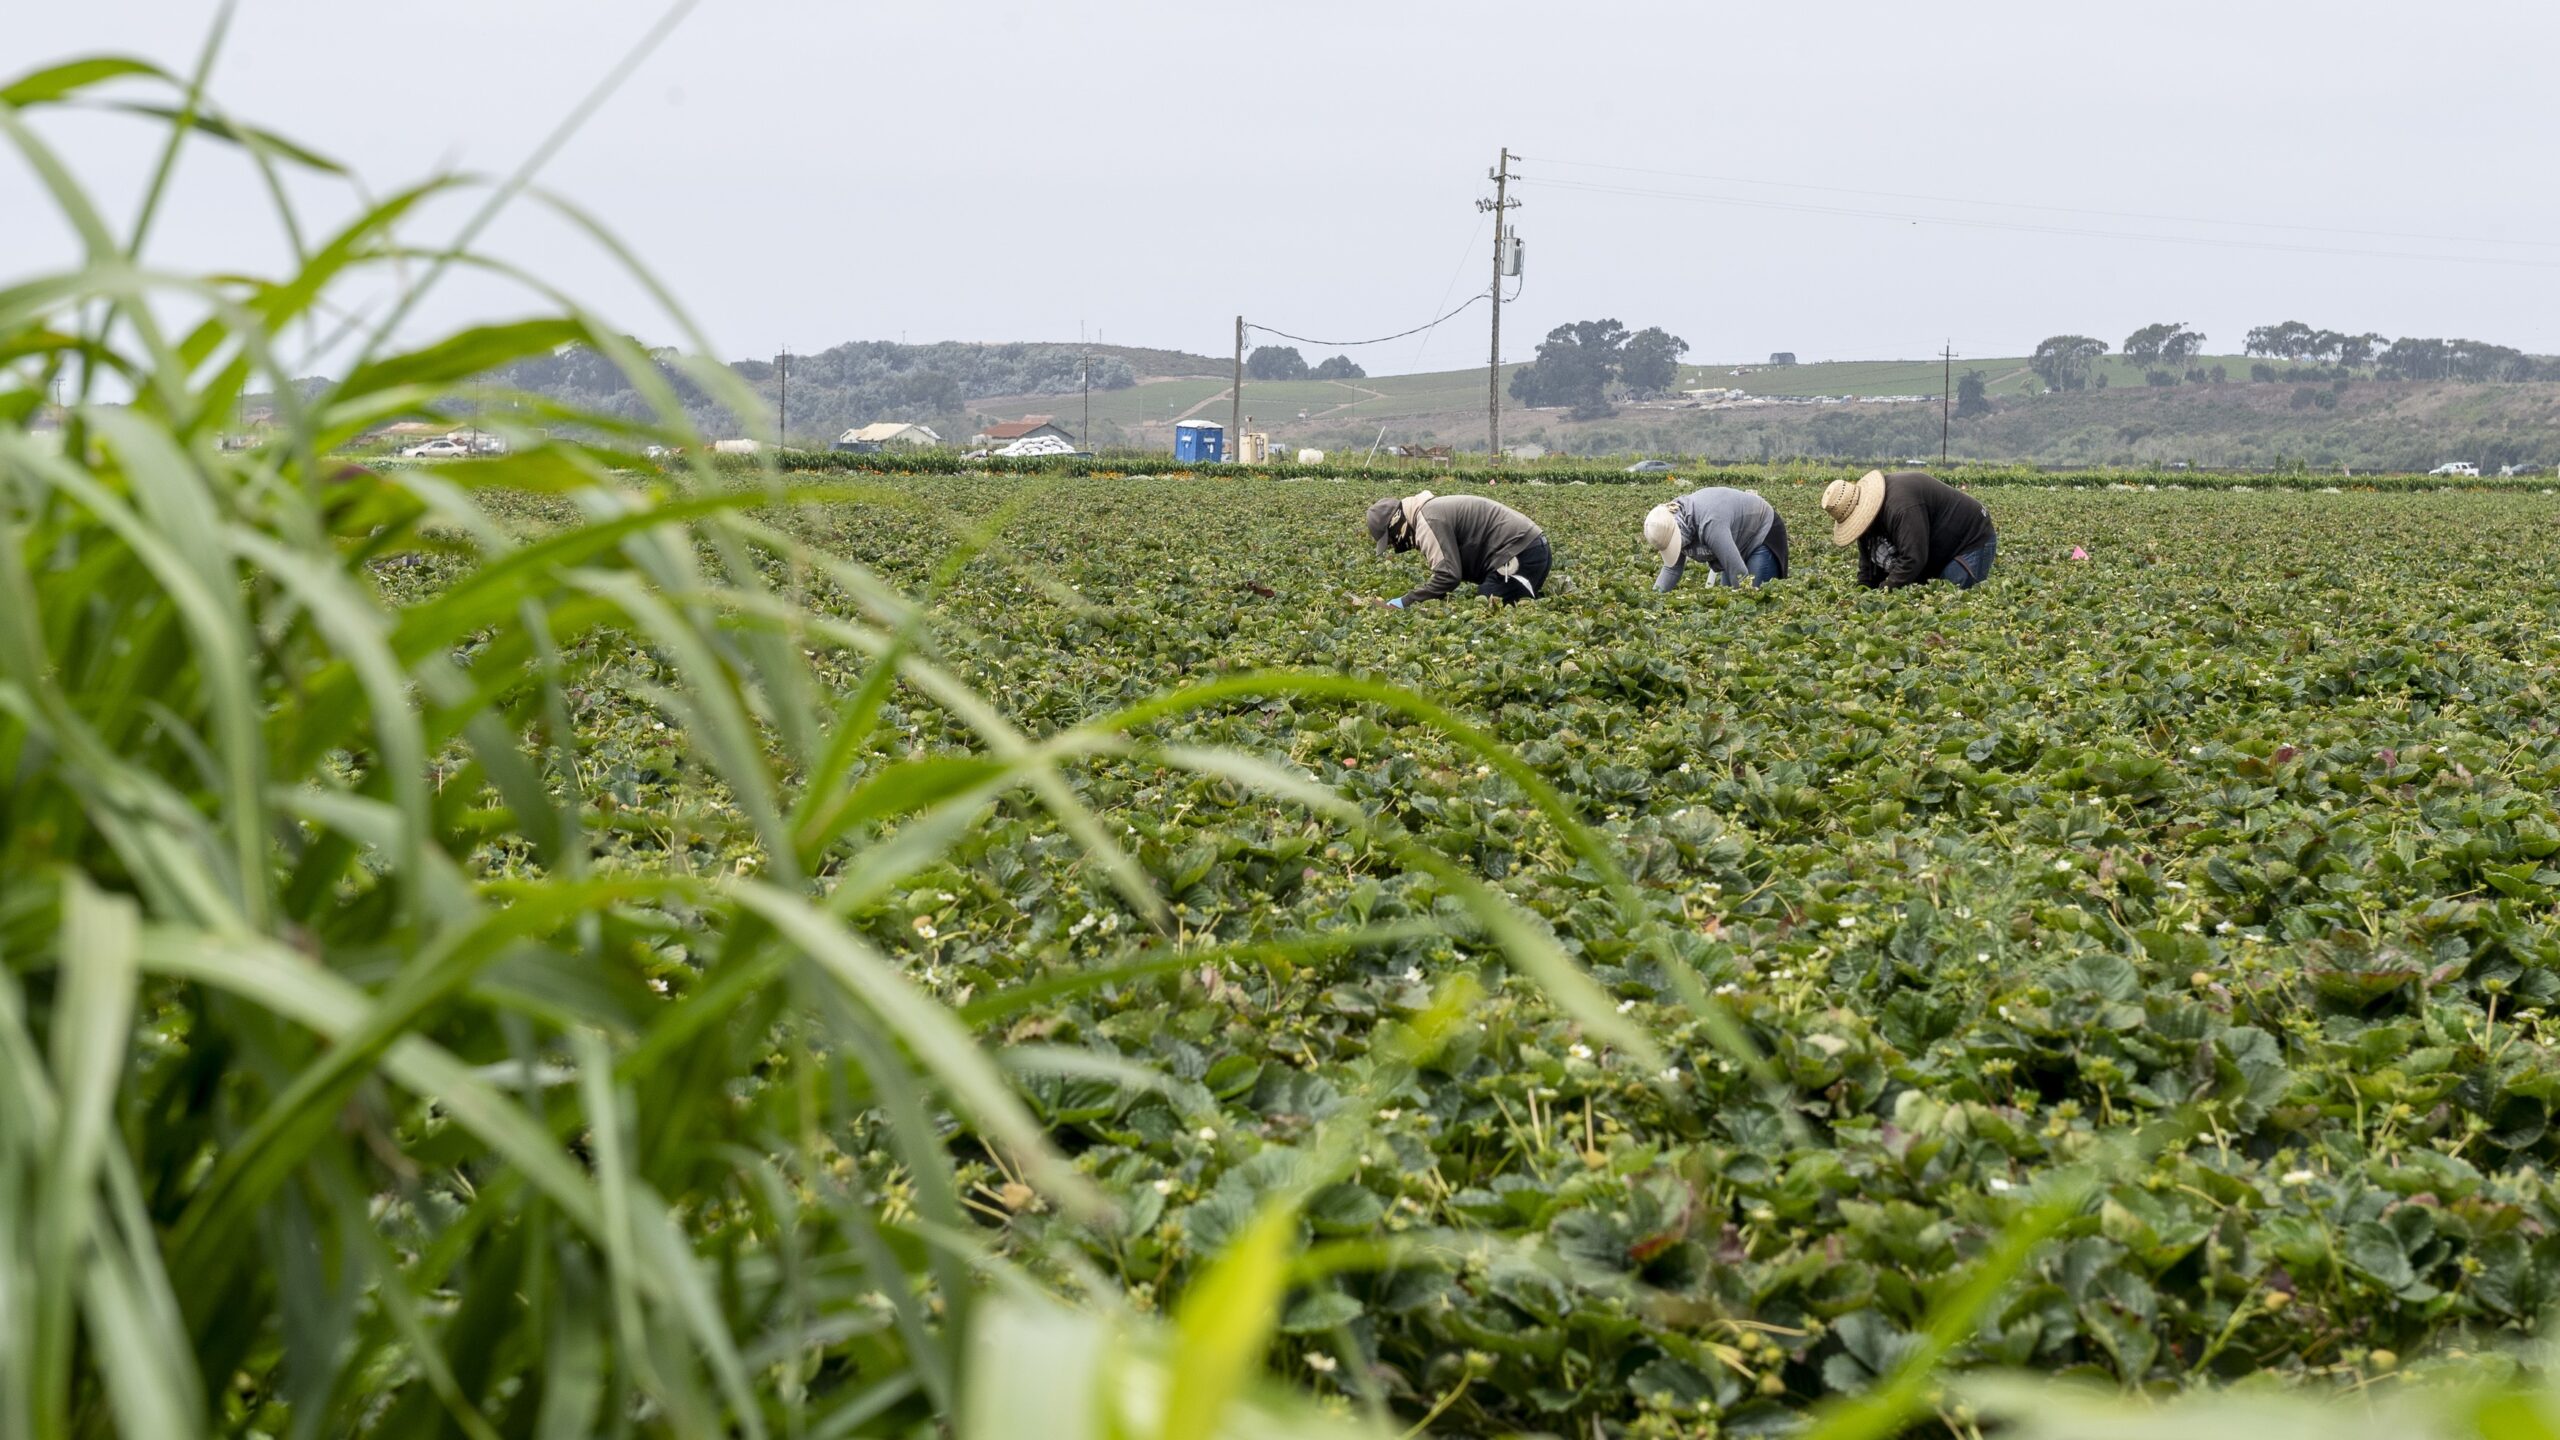 Three farmworkers bending down picking strawberries in a field. Pesticides were applied to berries and other crops near schools in Santa Cruz County hundreds of times.